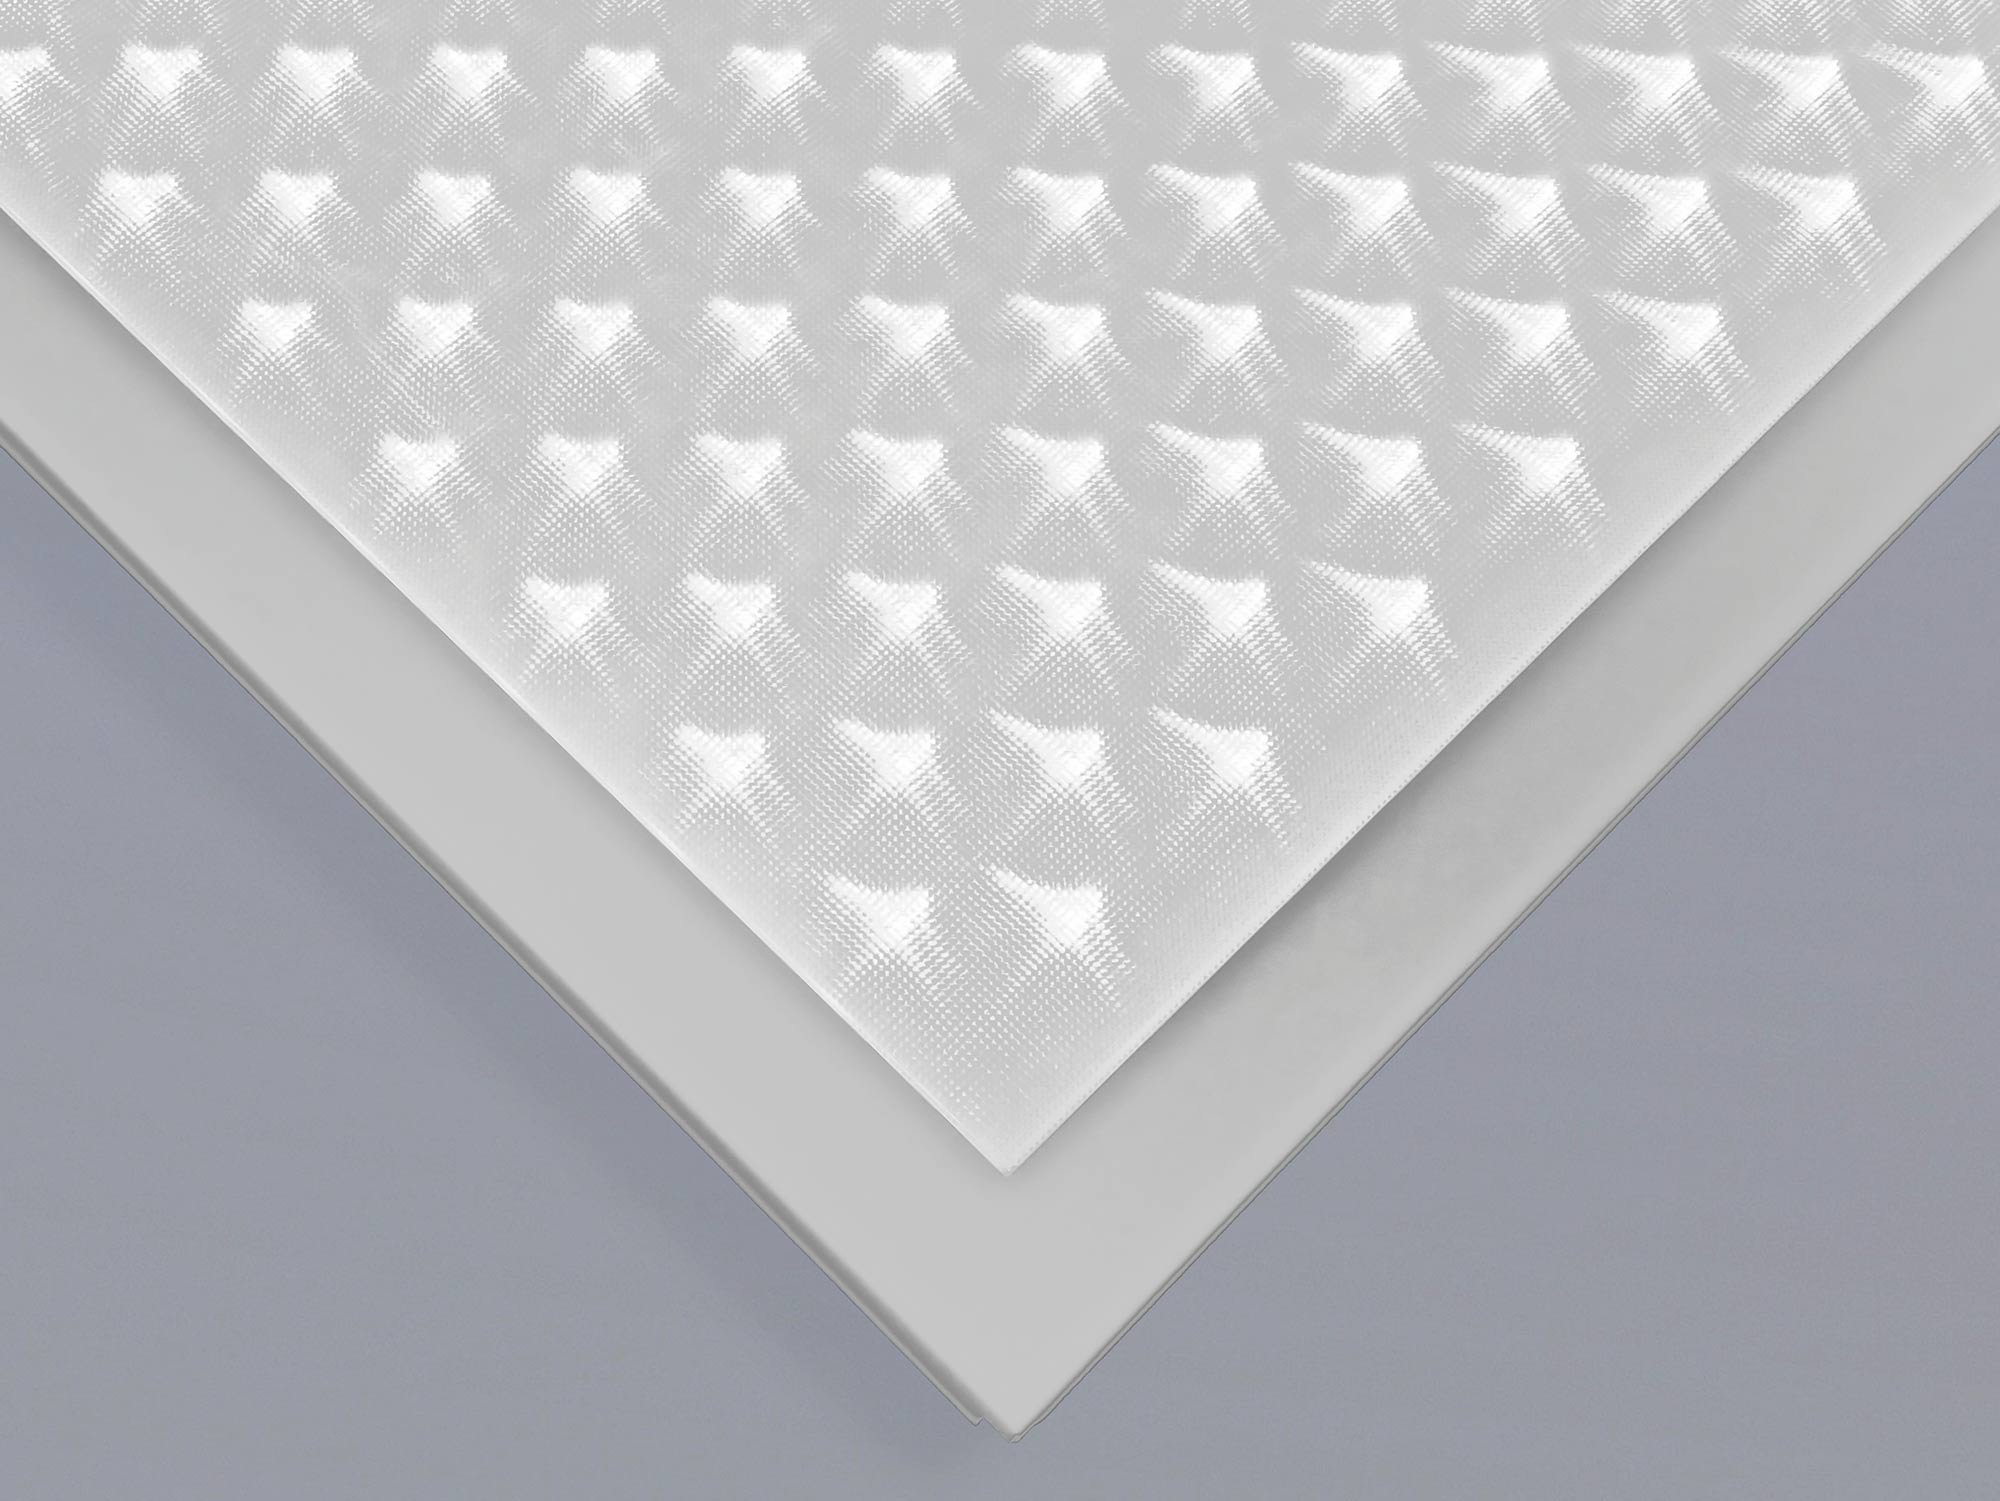 LED luminaire Quattro-Line for lay-in tiles with micro prism cover IP40/IP20